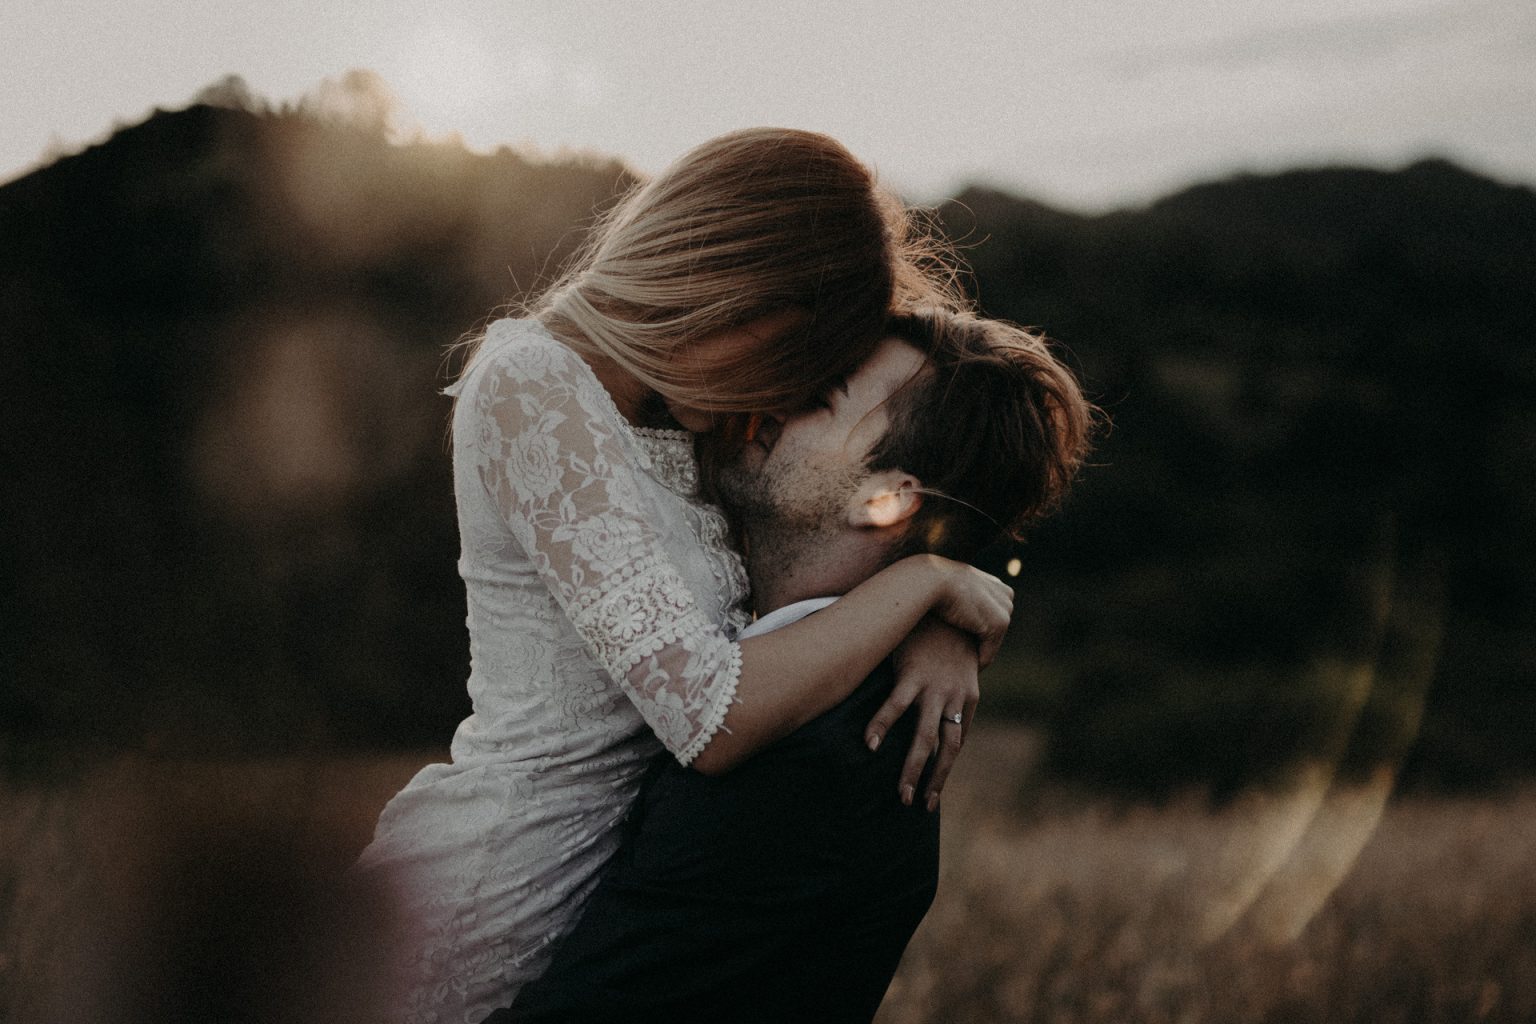 groom lifting bride kiss close face passionate sunset